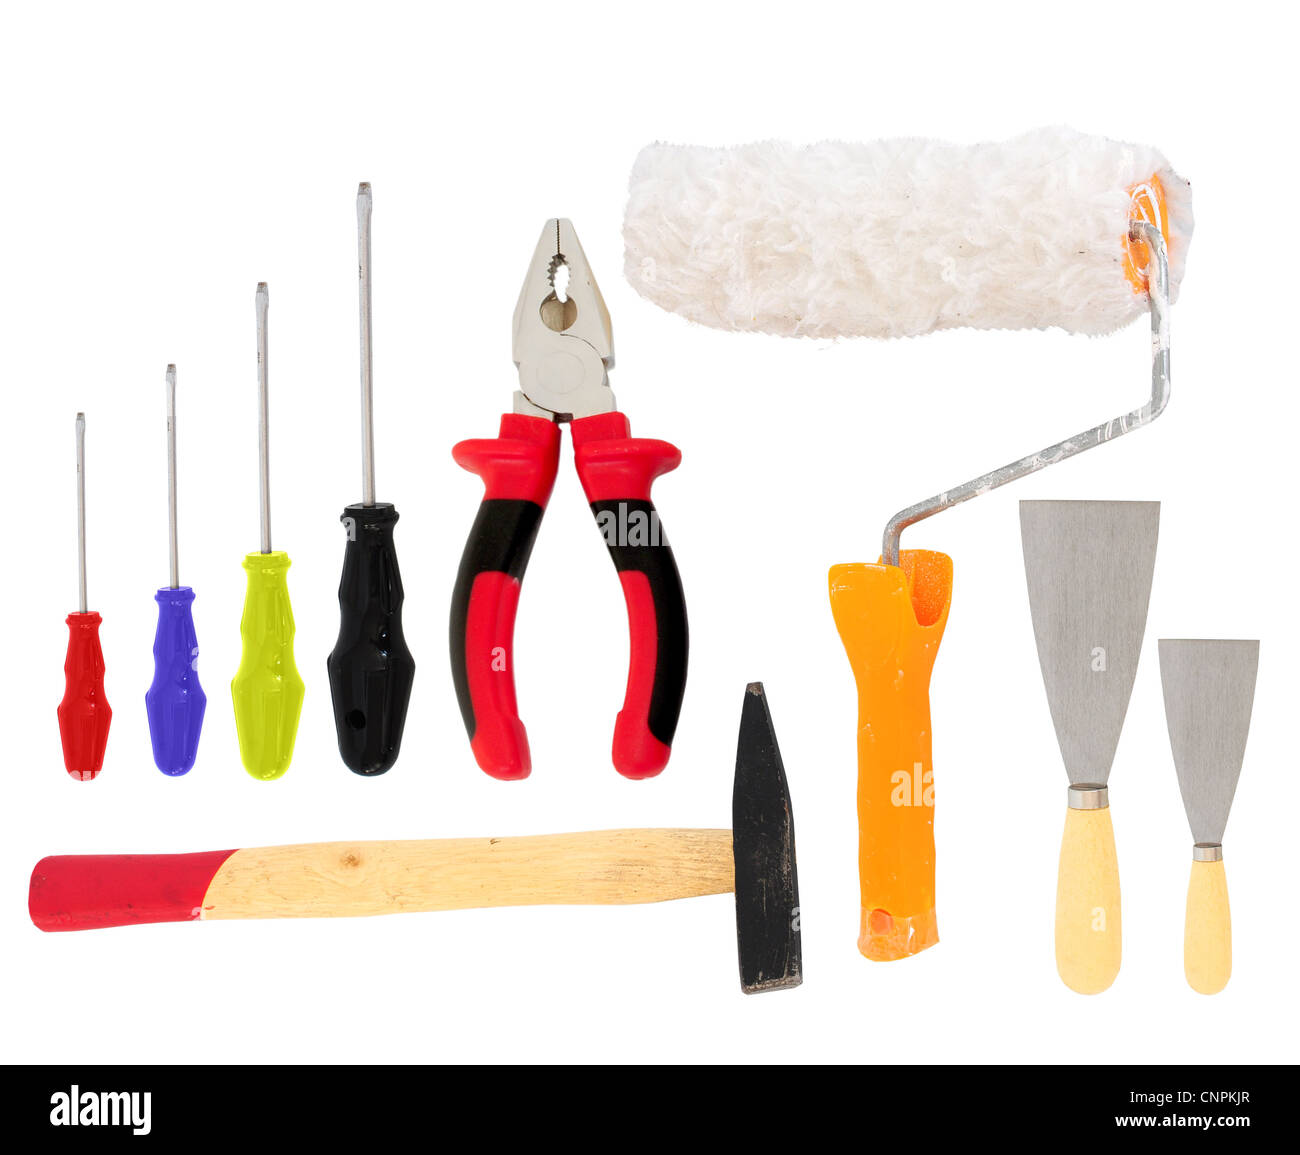 Different tools - hammer, pliers, screwdrivers,spatula, paint roller Stock Photo